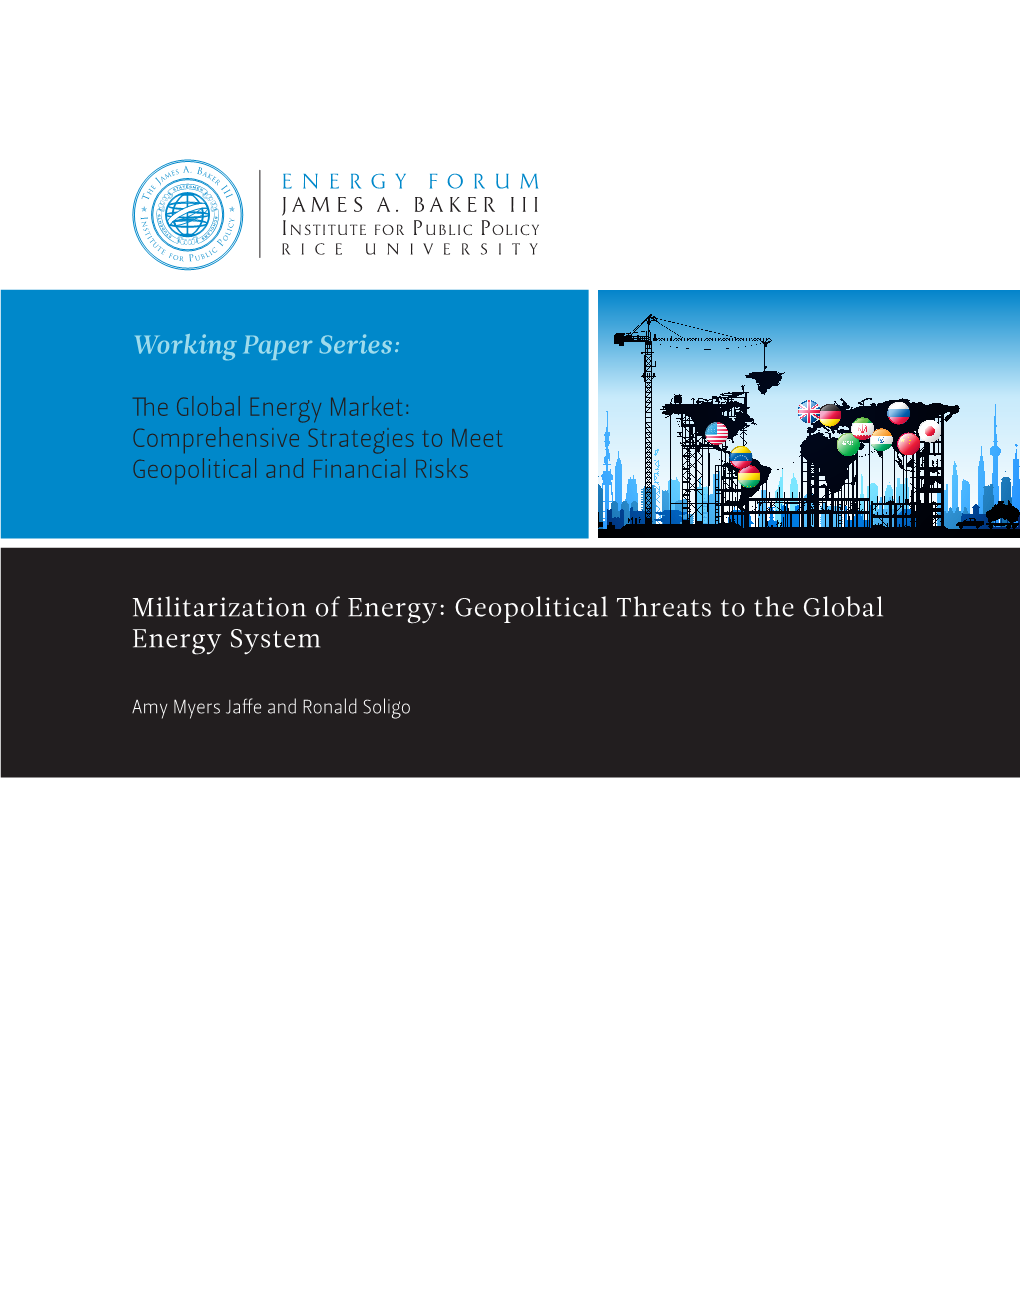 Militarization of Energy: Geopolitical Threats to the Global Energy System